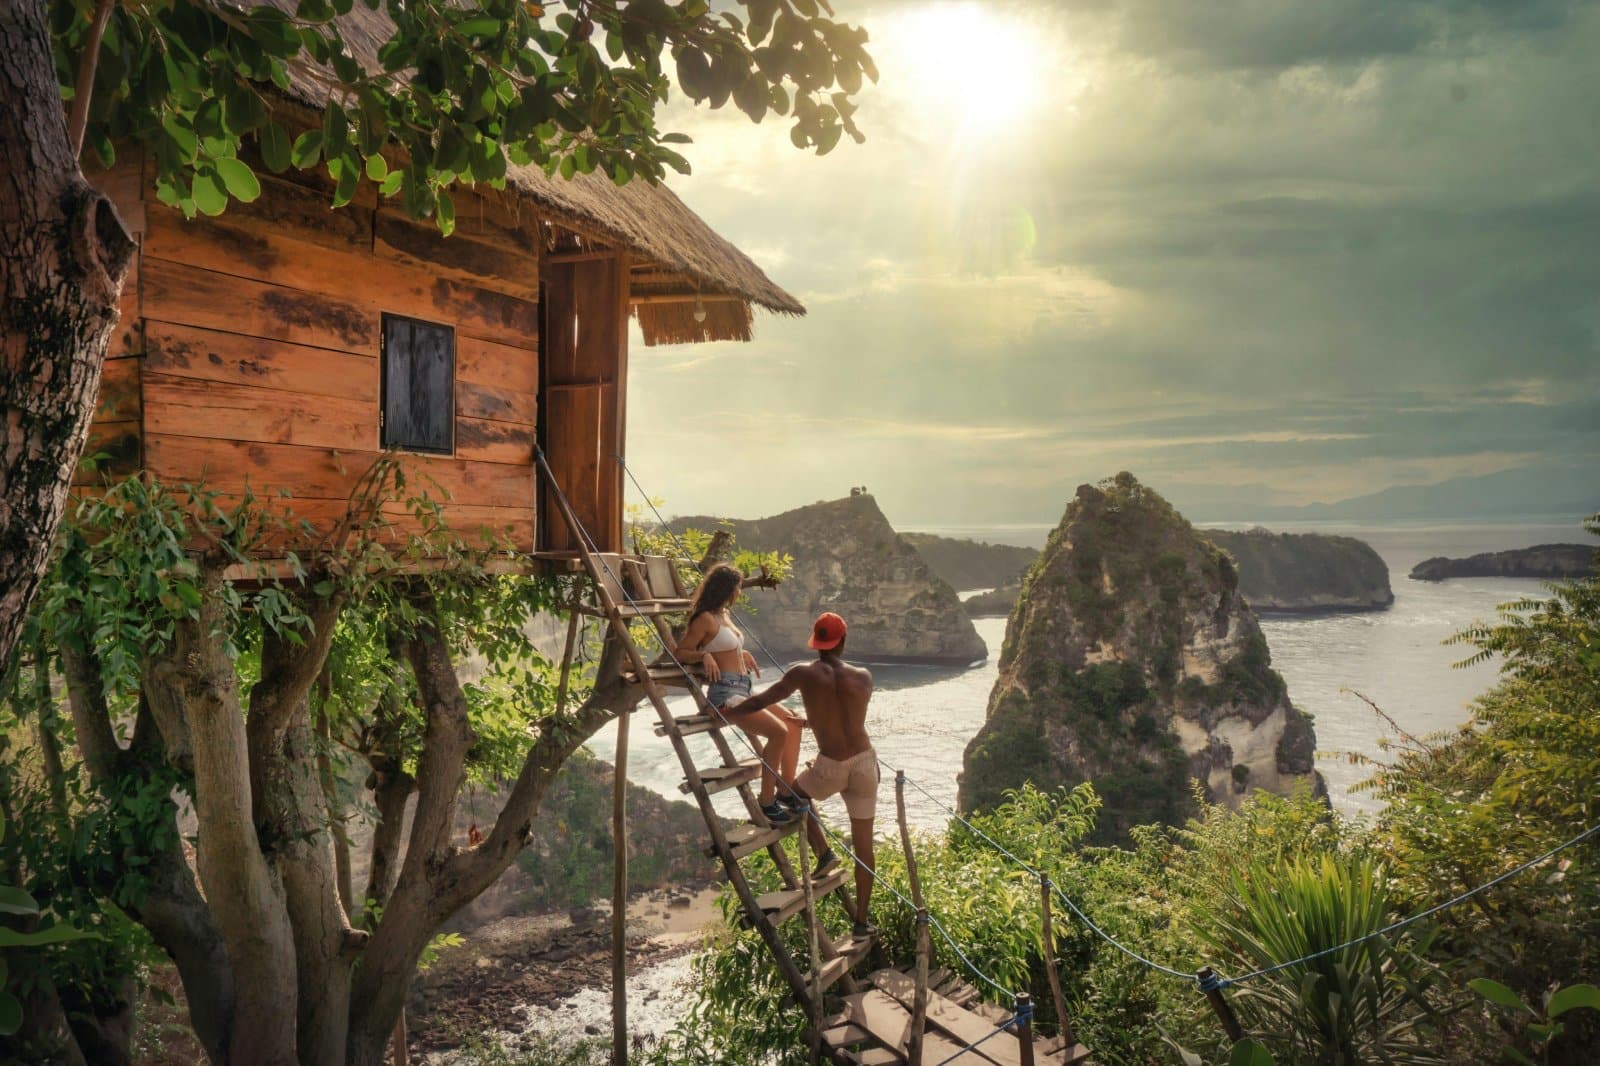 <p><span>Choosing a treehouse stay is about embracing a unique travel experience that combines comfort with the thrill of being close to nature. Each destination offers something different, from the rustic charm of a rainforest retreat to the sleek design of a modern treetop haven. </span></p> <p><span>Whether seeking solitude, a romantic escape, or an adventurous outing, these treehouse accommodations provide an unforgettable way to experience the world from above the ground. Remember, the key to an excellent treehouse stay is to embrace the simplicity and beauty of your natural surroundings. </span><span>So, pack your bags, and get ready to elevate your next vacation literally!</span></p> <p><span>More Articles Like This…</span></p> <p><a href="https://thegreenvoyage.com/barcelona-discover-the-top-10-beach-clubs/"><span>Barcelona: Discover the Top 10 Beach Clubs</span></a></p> <p><a href="https://thegreenvoyage.com/top-destination-cities-to-visit/"><span>2024 Global City Travel Guide – Your Passport to the World’s Top Destination Cities</span></a></p> <p><a href="https://thegreenvoyage.com/exploring-khao-yai-a-hidden-gem-of-thailand/"><span>Exploring Khao Yai 2024 – A Hidden Gem of Thailand</span></a></p> <p><span>The post <a href="https://passingthru.com/enchanting-treehouse-retreats/">Elevated Escapes: Exploring 15 Enchanting Treehouse Retreats</a> republished on </span><a href="https://passingthru.com/"><span>Passing Thru</span></a><span> with permission from </span><a href="https://thegreenvoyage.com/"><span>The Green Voyage</span></a><span>.</span></p> <p><span>Featured Image Credit: Shutterstock / PhotoSunnyDays. </span></p> <p><span>For transparency, this content was partly developed with AI assistance and carefully curated by an experienced editor to be informative and ensure accuracy.</span></p>